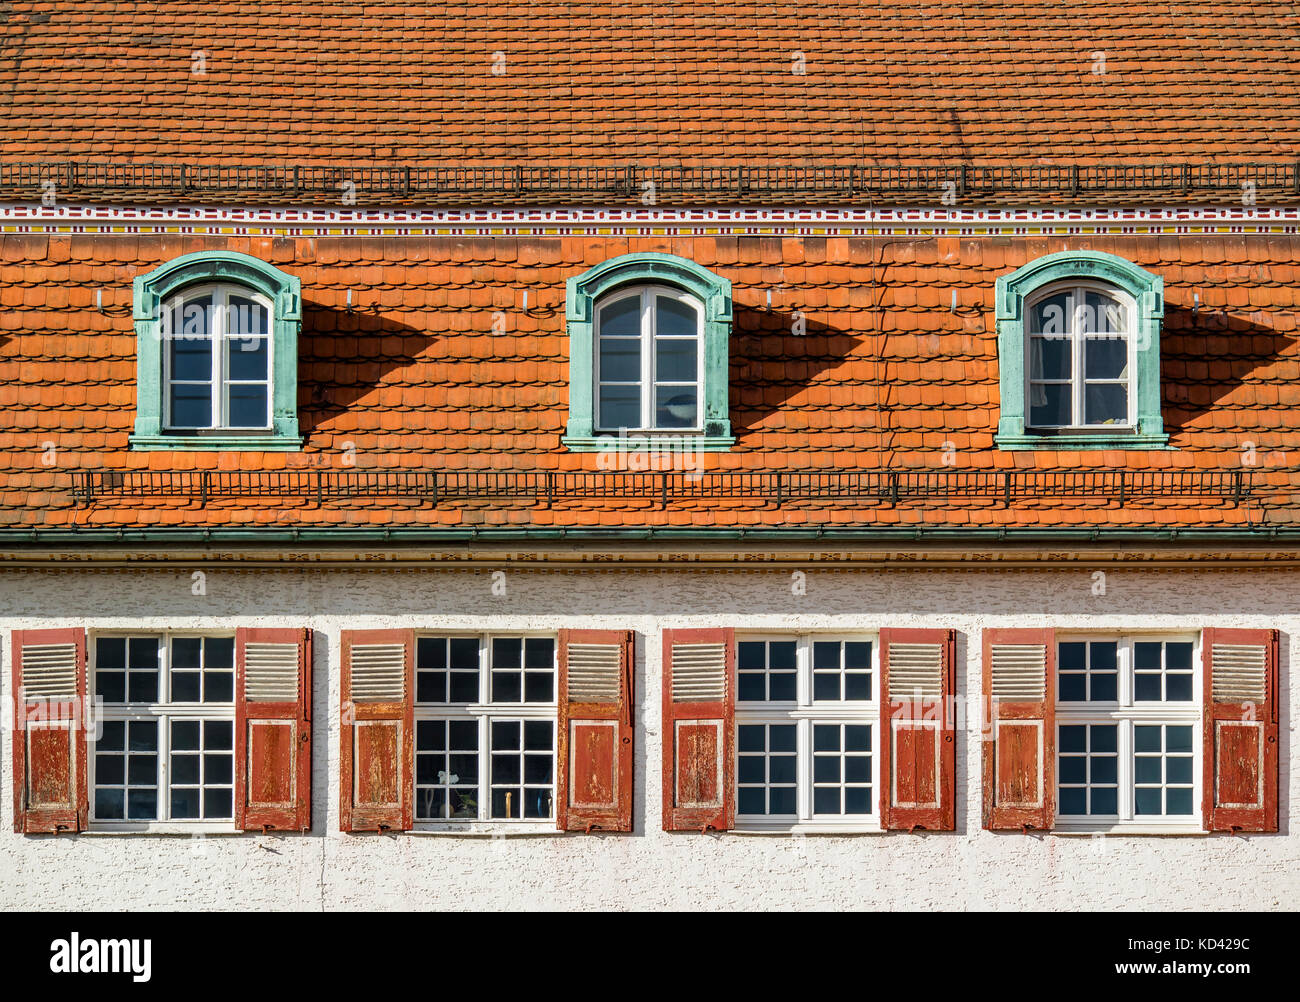 Sprudelhof Bad Nauheim, Germany. Windows at side wing portal house. The Sprudelhof is a former health resort founded in the Art Nouveau era. Stock Photo